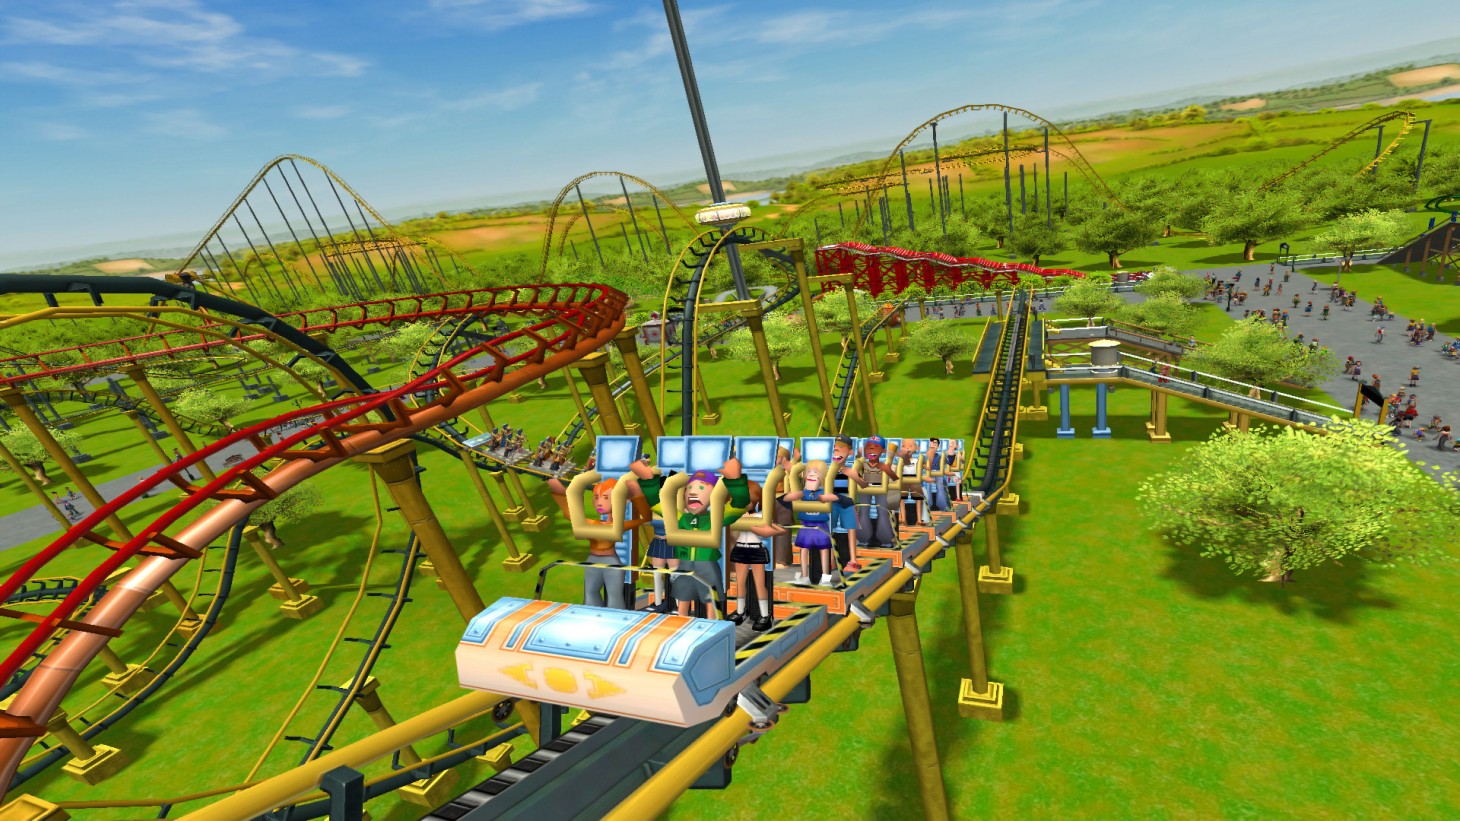 RollerCoaster Tycoon 3: Complete Edition Switch Review